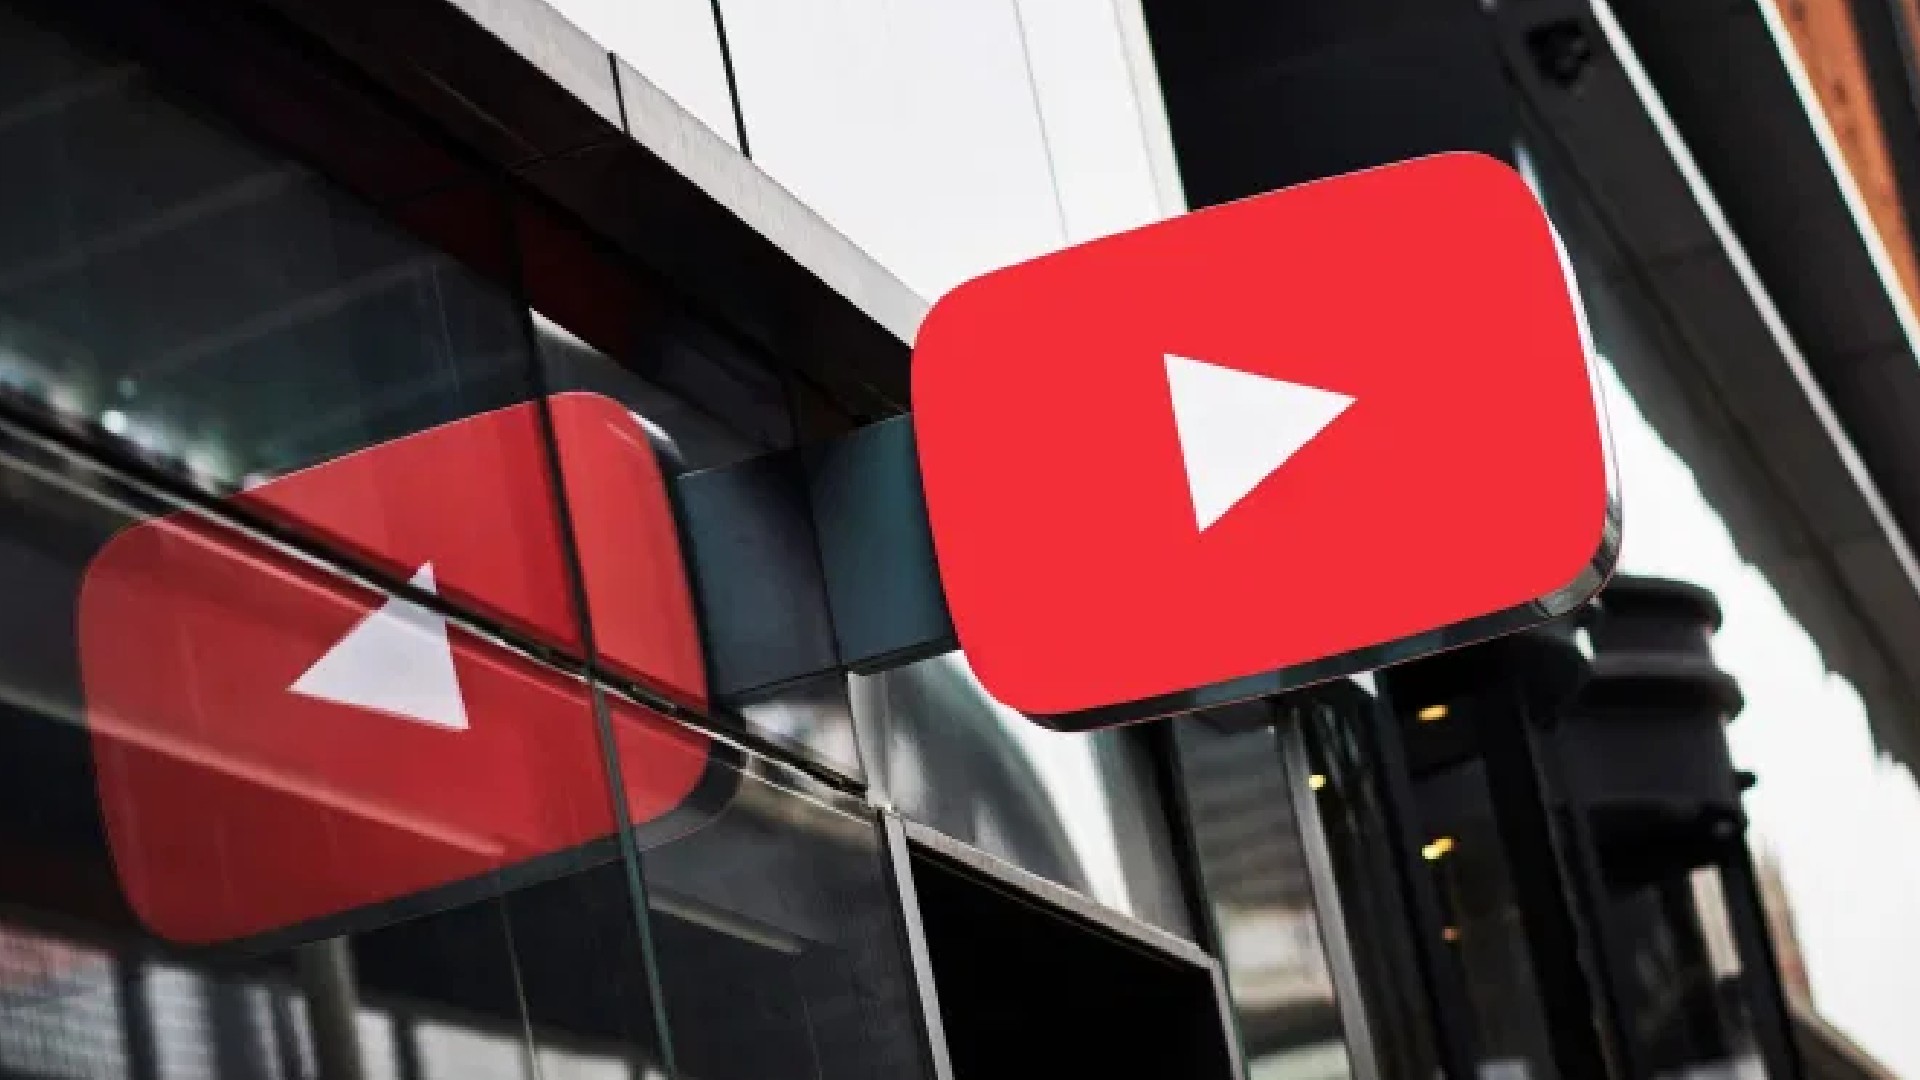 YouTube’s new metric shows an artist’s reach across all formats, including Shorts